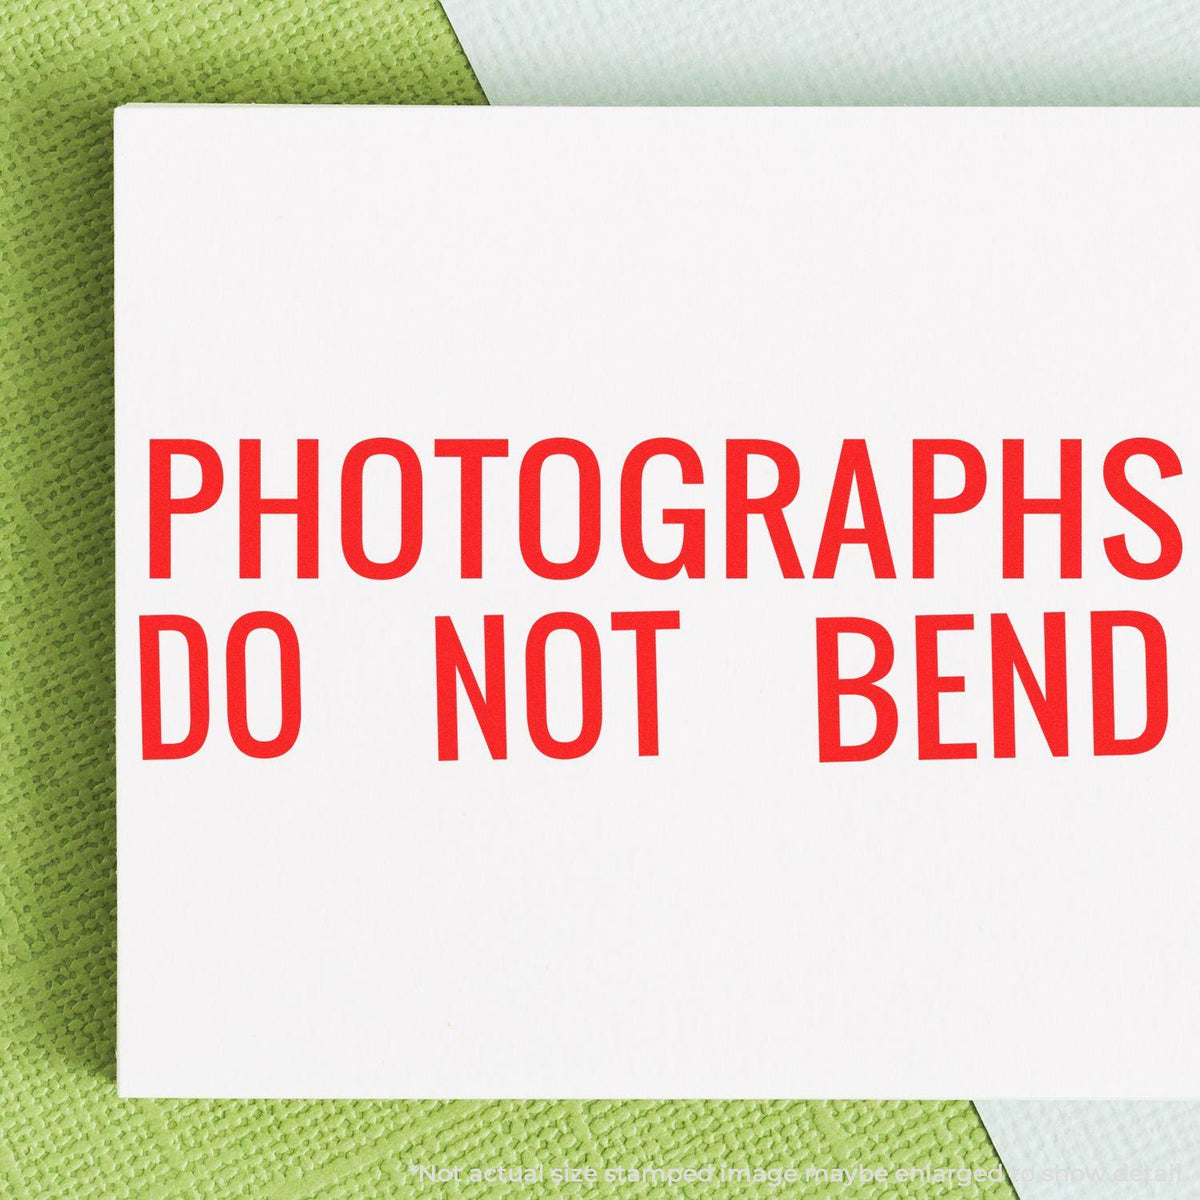 In Use Large Pre-Inked Photographs Do Not Bend Stamp Image